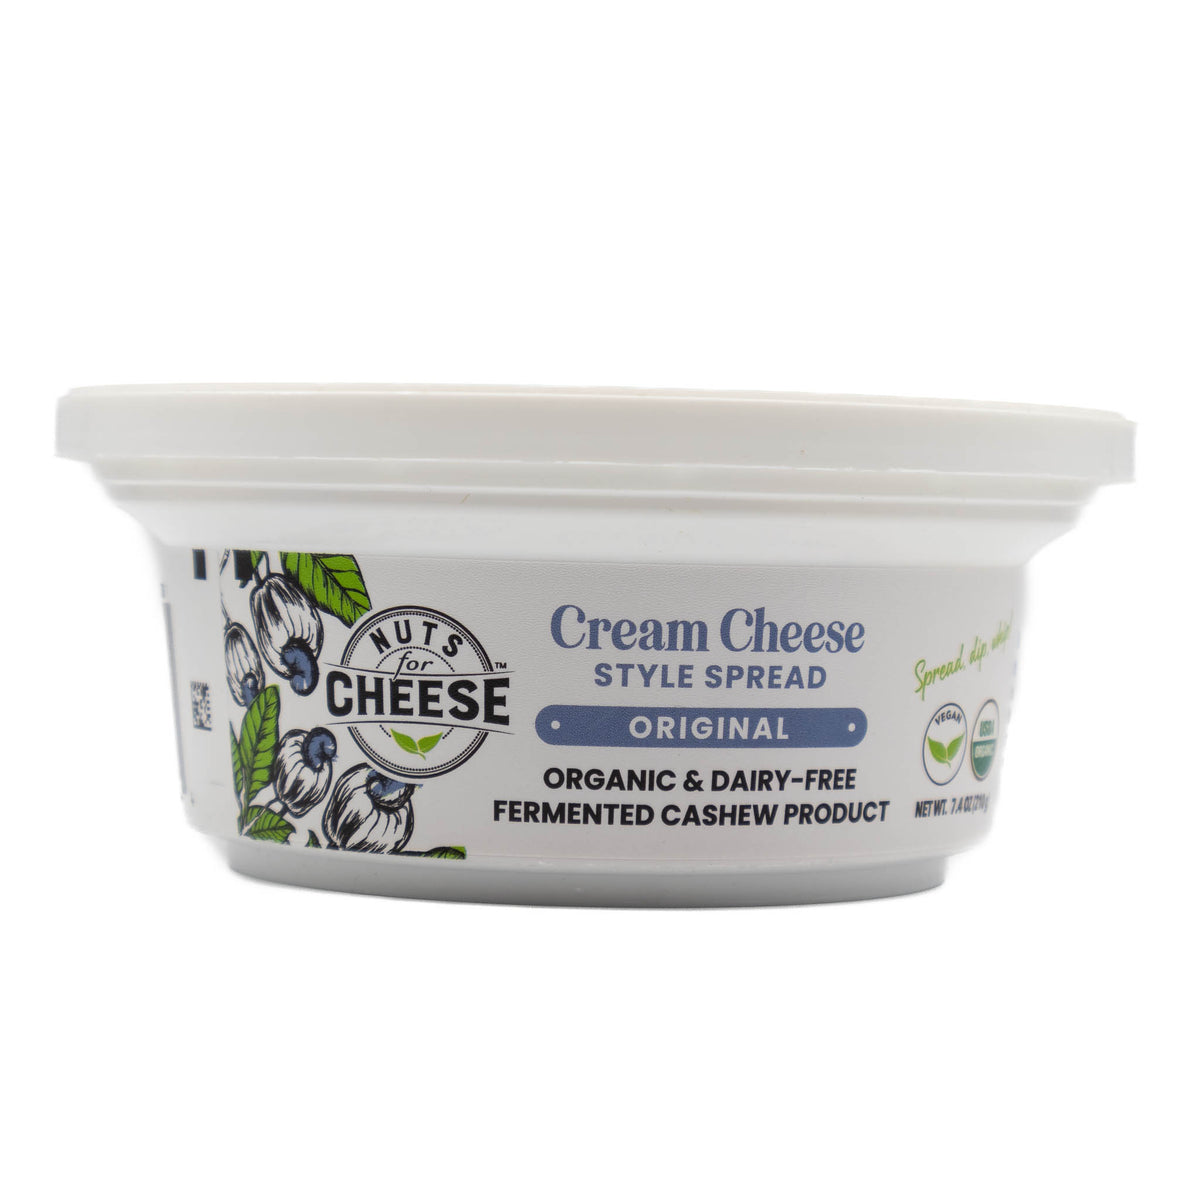 Nuts For Cheese Cream Cheese Original